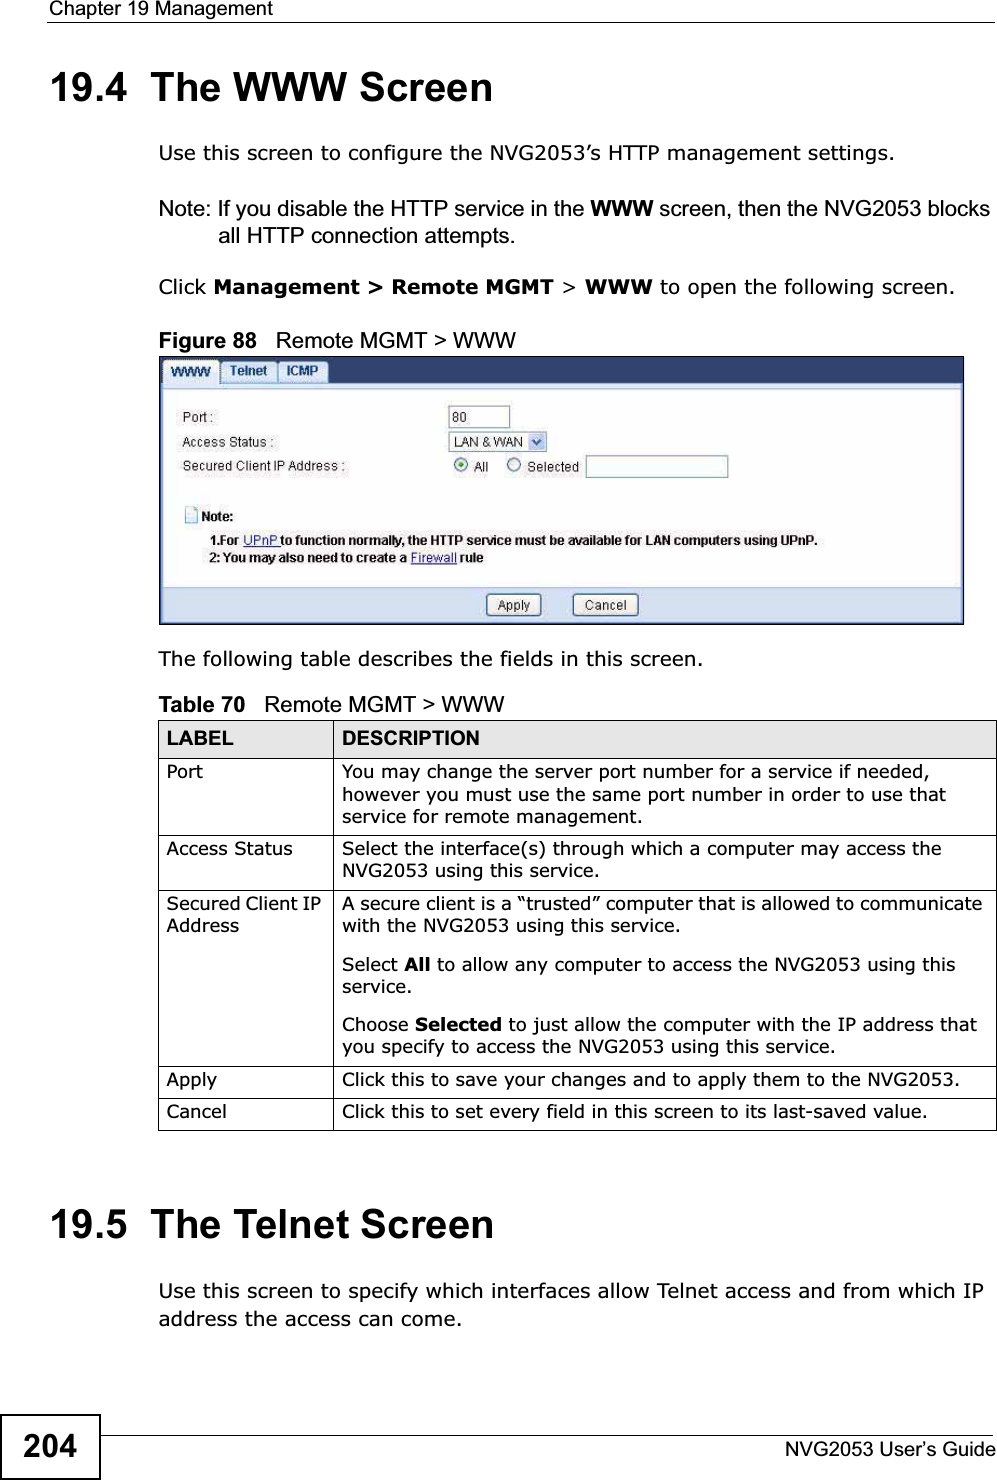 Chapter 19 ManagementNVG2053 User’s Guide20419.4  The WWW ScreenUse this screen to configure the NVG2053’s HTTP management settings.Note: If you disable the HTTP service in the WWW screen, then the NVG2053 blocks all HTTP connection attempts.Click Management &gt; Remote MGMT &gt; WWW to open the following screen.  Figure 88   Remote MGMT &gt; WWW The following table describes the fields in this screen. 19.5  The Telnet ScreenUse this screen to specify which interfaces allow Telnet access and from which IP address the access can come.Table 70   Remote MGMT &gt; WWWLABEL DESCRIPTIONPort You may change the server port number for a service if needed, however you must use the same port number in order to use that service for remote management.Access Status Select the interface(s) through which a computer may access the NVG2053 using this service.Secured Client IP AddressA secure client is a “trusted” computer that is allowed to communicate with the NVG2053 using this service. Select All to allow any computer to access the NVG2053 using this service.Choose Selected to just allow the computer with the IP address that you specify to access the NVG2053 using this service.Apply Click this to save your changes and to apply them to the NVG2053.Cancel Click this to set every field in this screen to its last-saved value.